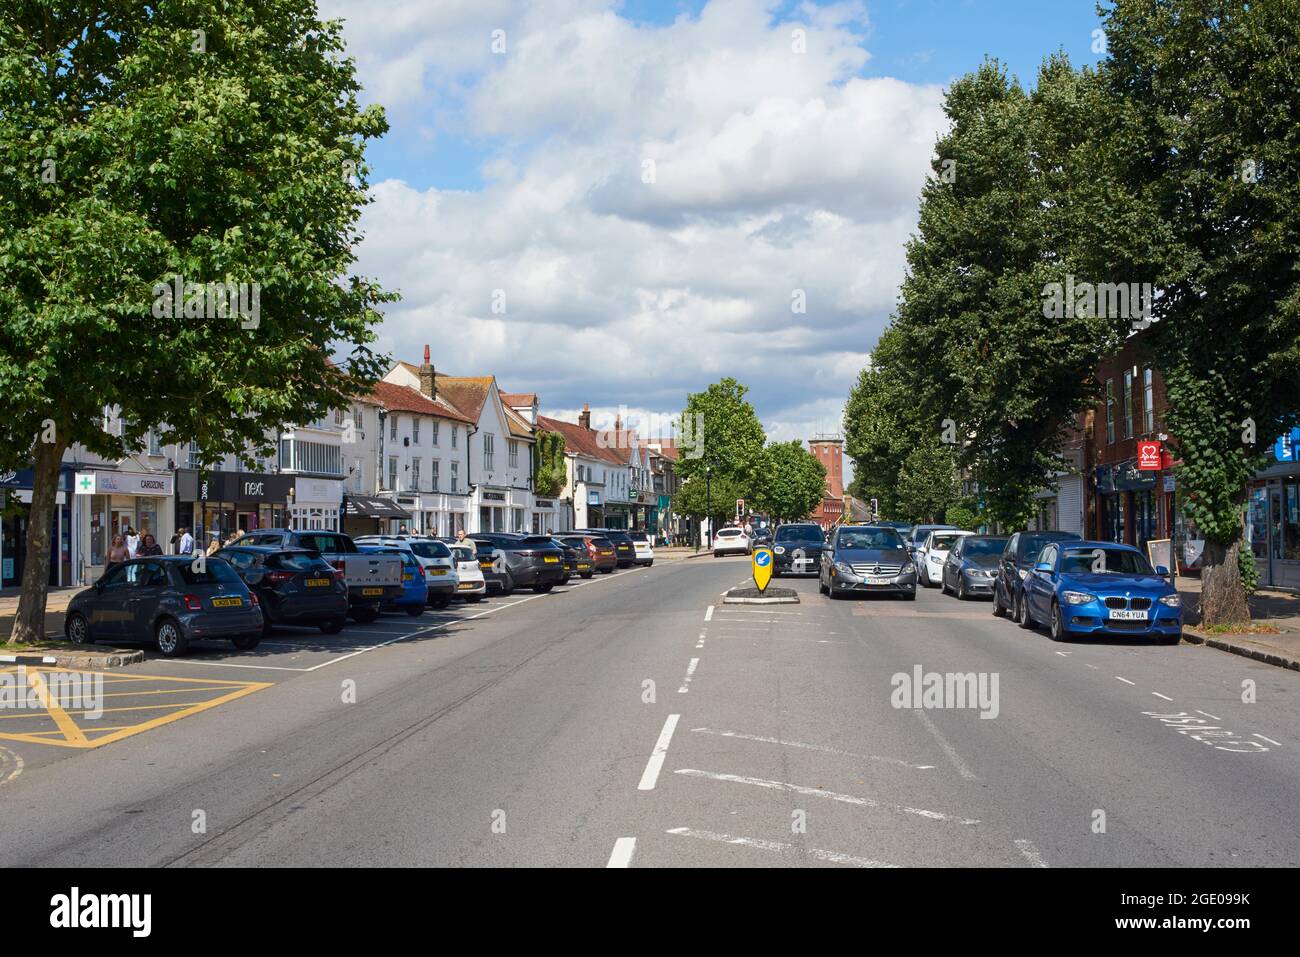 The High Street, Epping, Essex, UK, with traffic and pedestrians Stock Photo